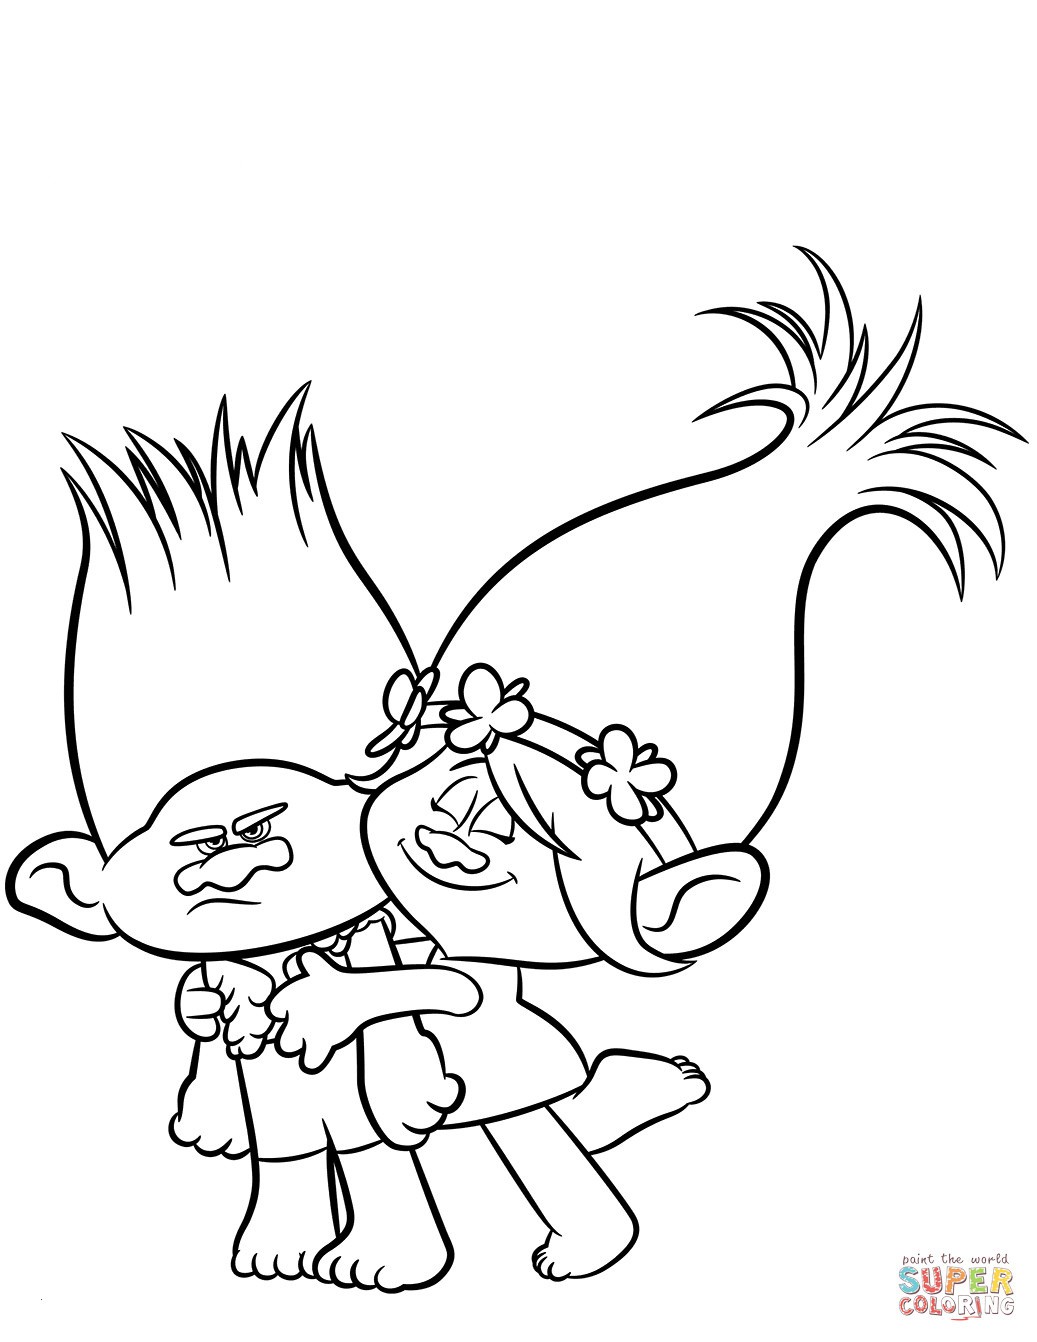 trolls-coloring-pages-poppy-and-branch-of-trolls-coloring-pages-poppy-and-branch Trolls Coloring Pages Poppy and Branch Cartoon 